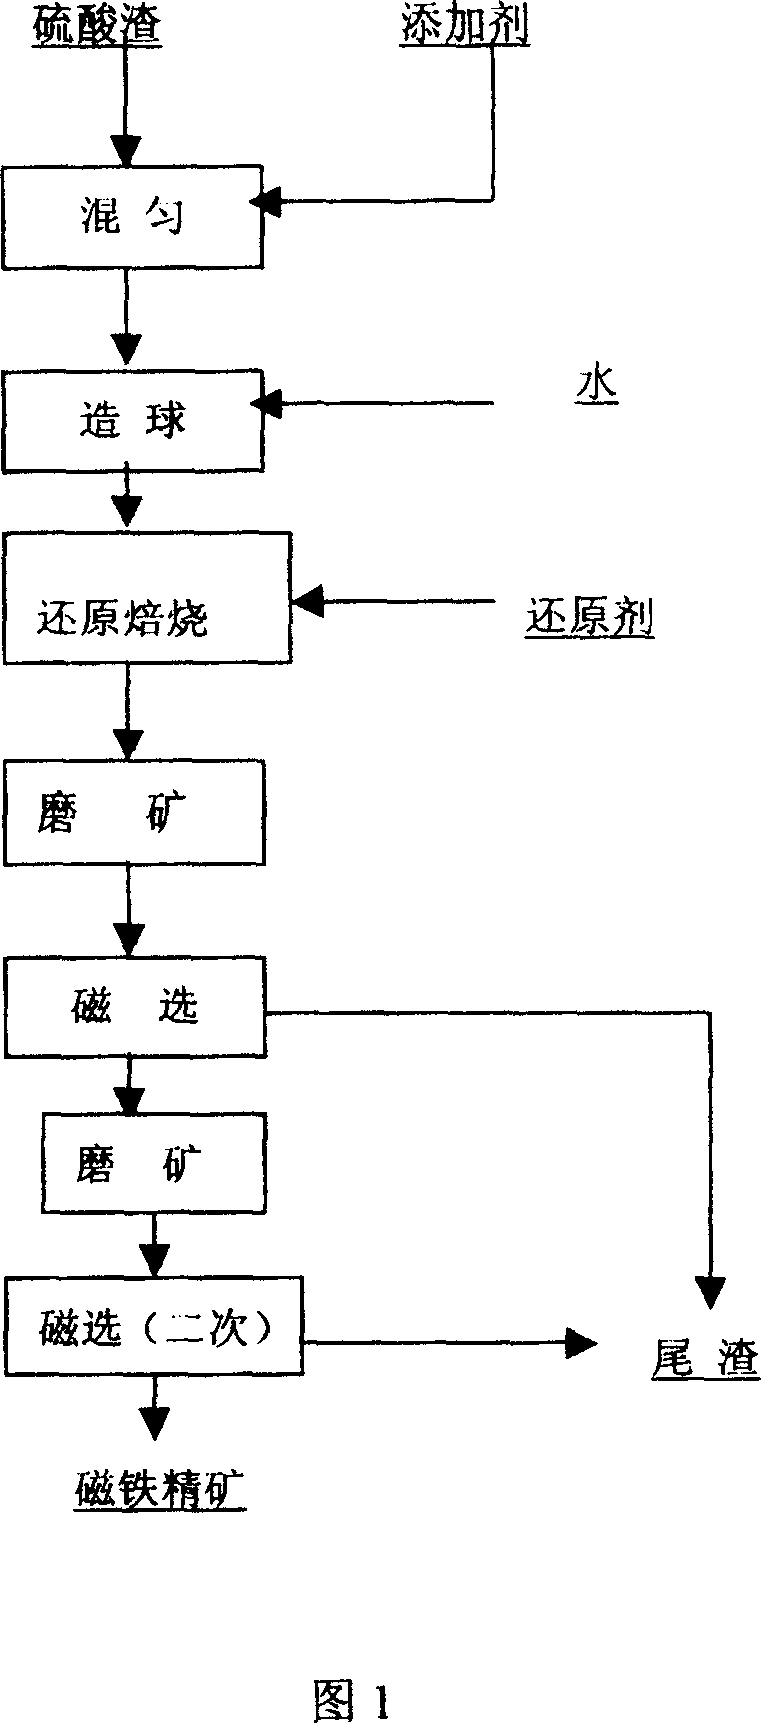 Method of producing high grade magnetic concentrate from sulfuric-acid residue composite pellet